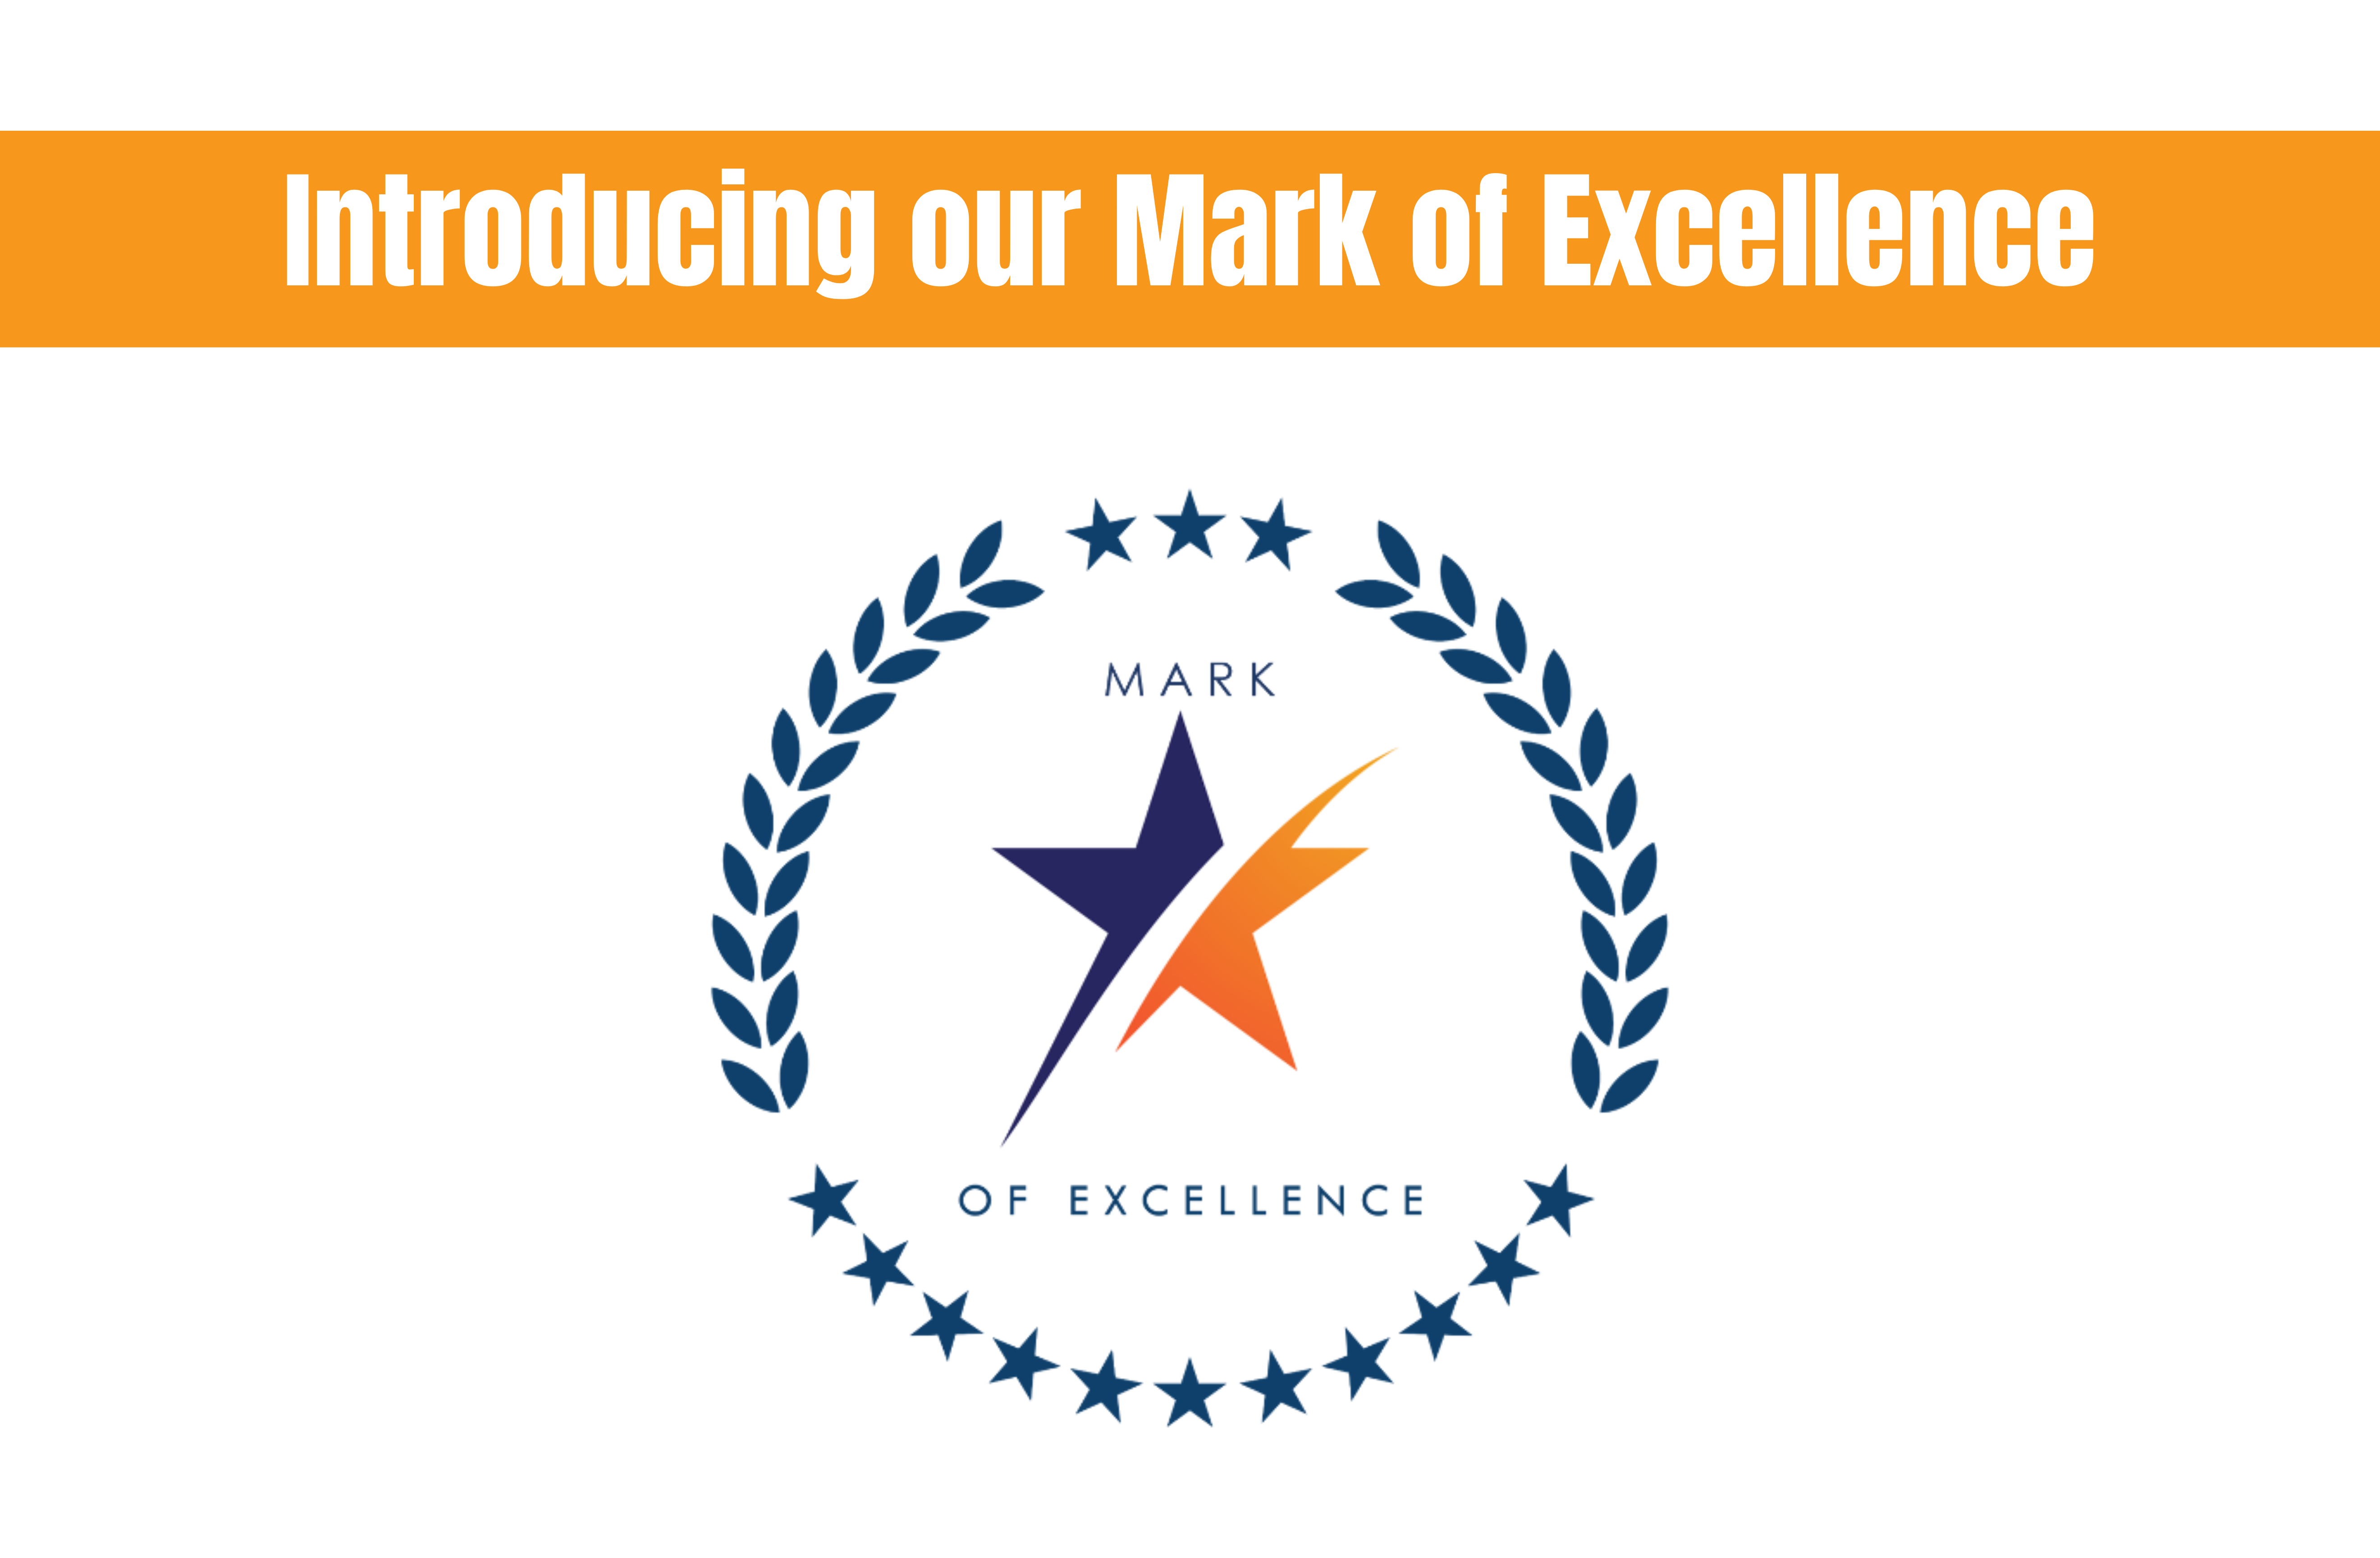 The Mark of Excellence